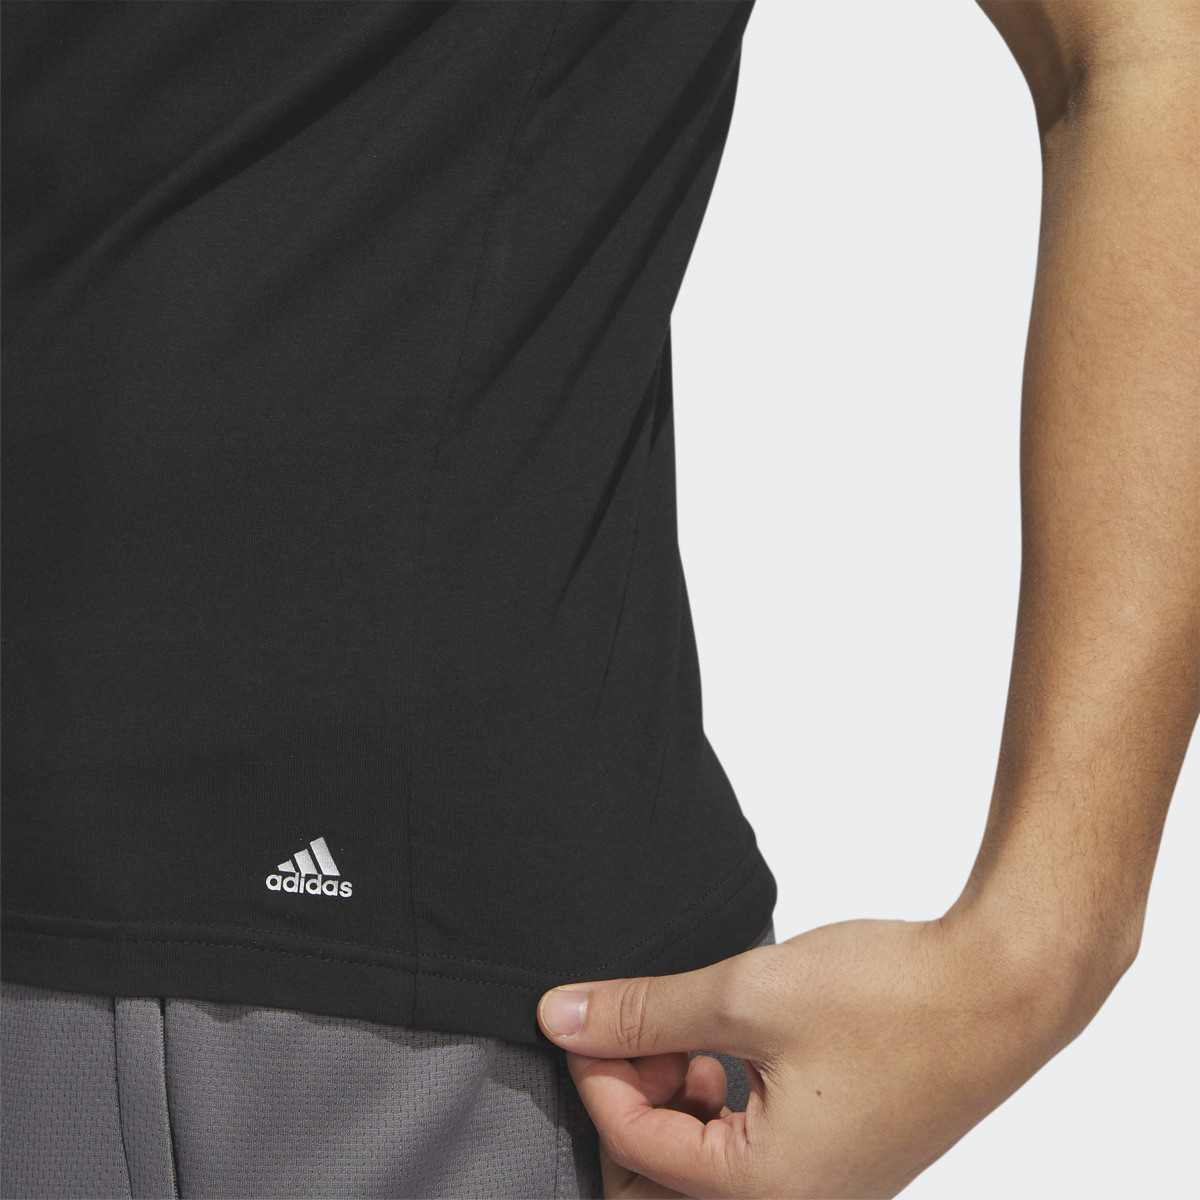 Adidas Stretch Cotton Ribbed Tank Top 2-Pack. 6